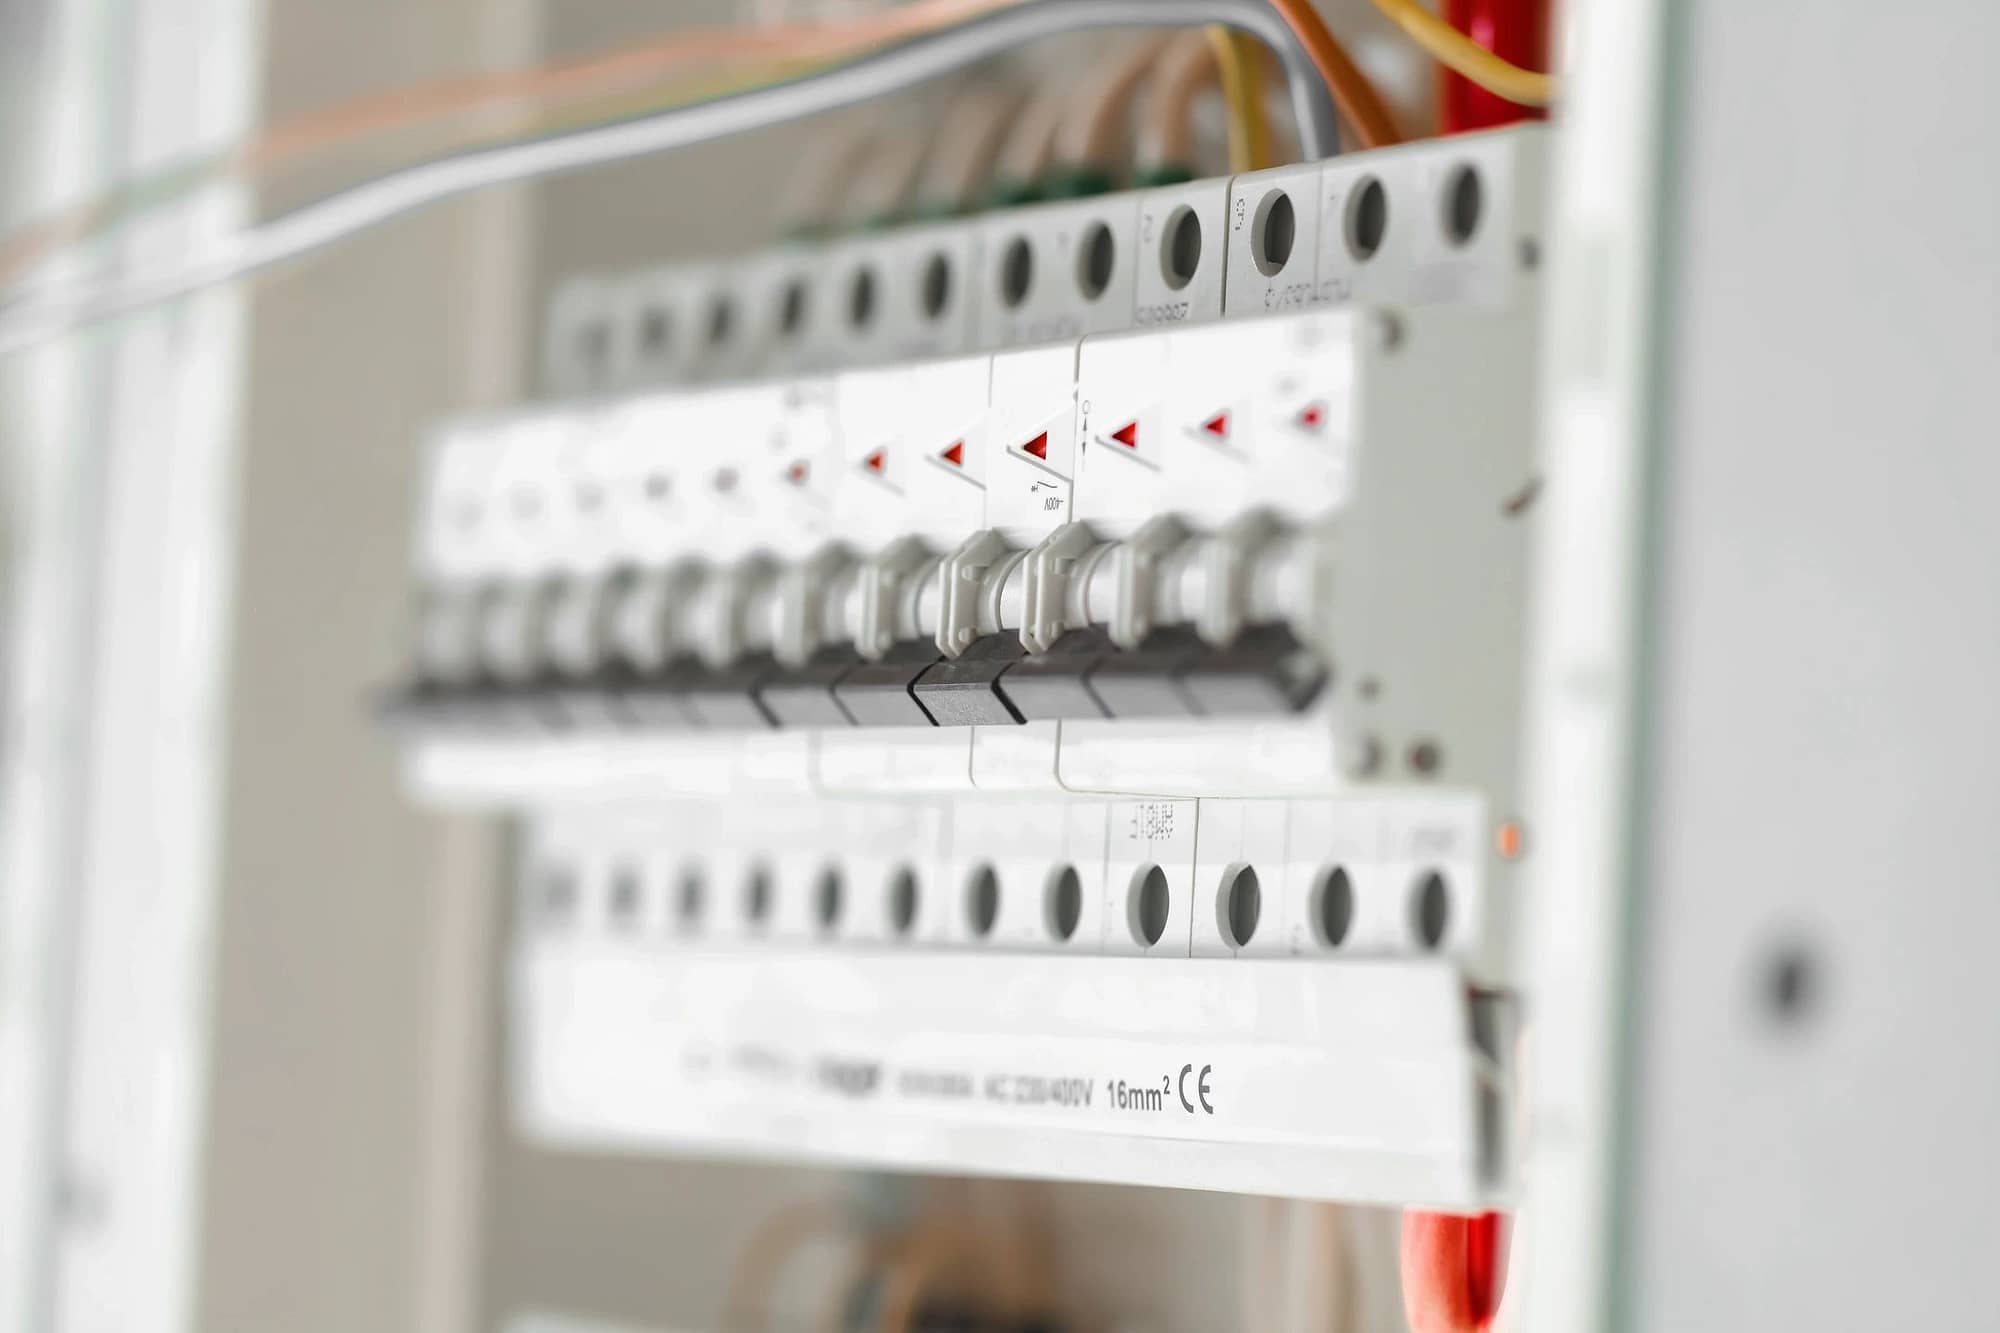 Let us help with your electrical needs.